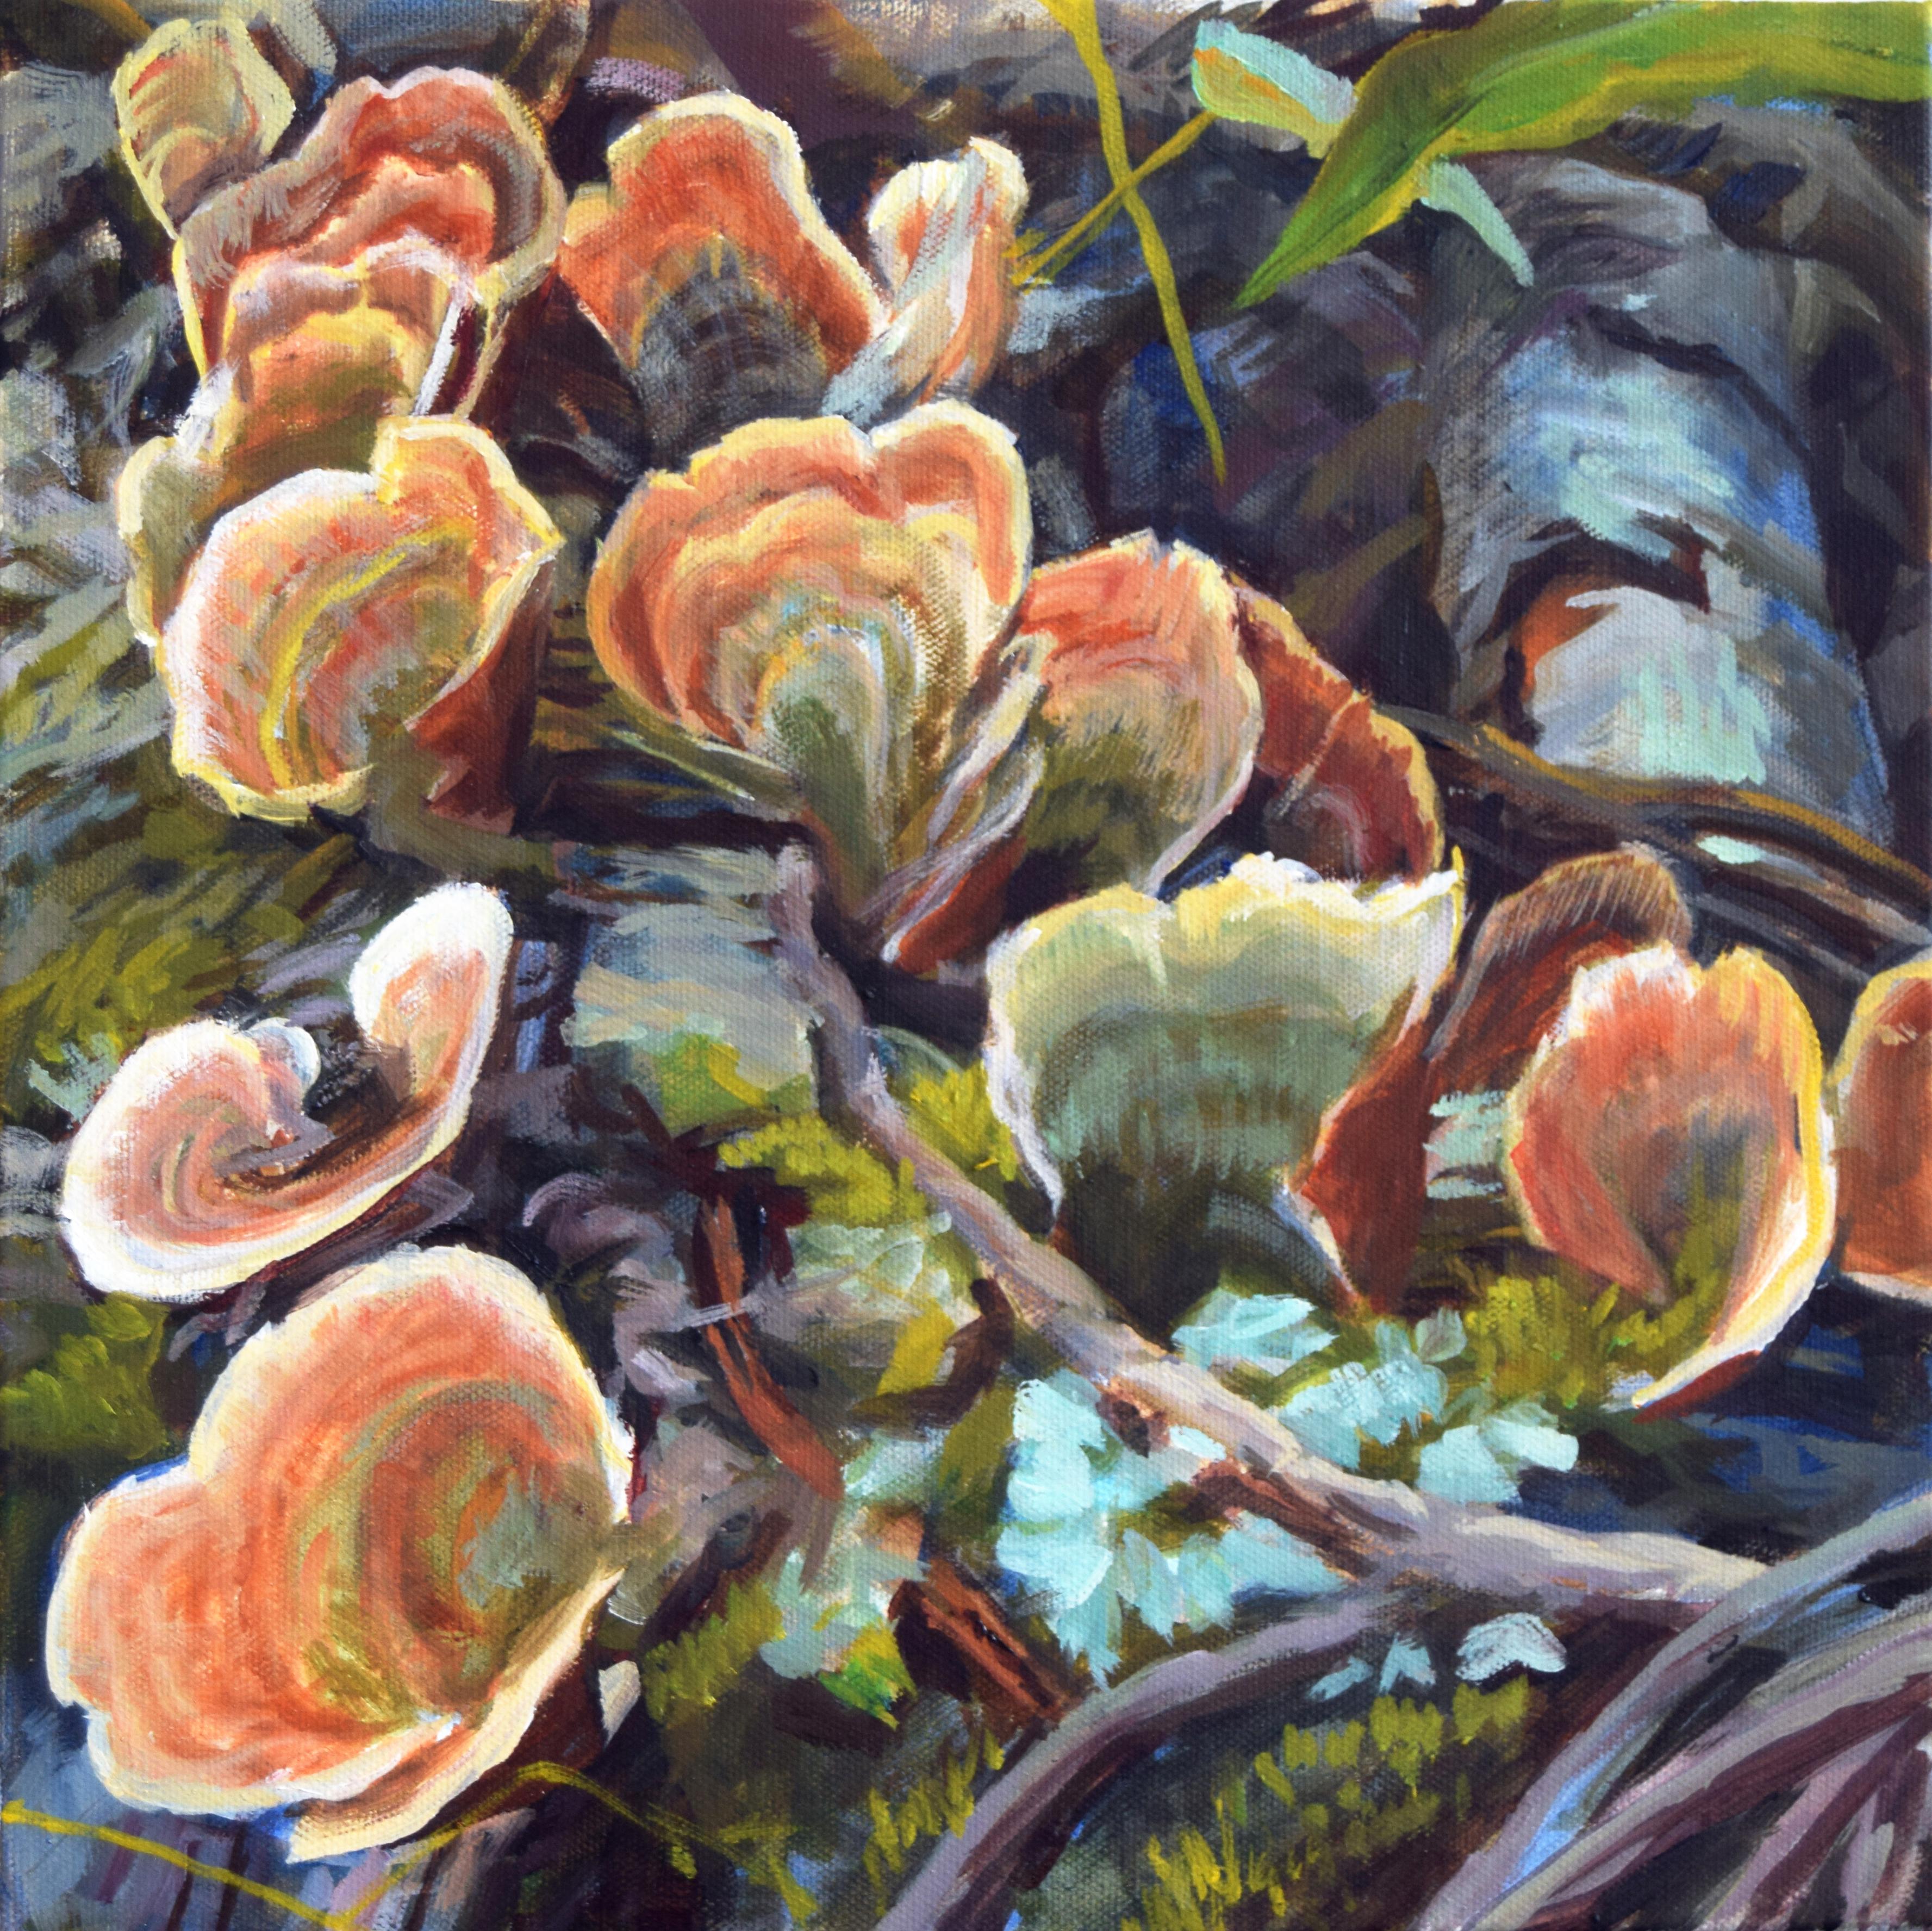 Andrea Kantrowitz Still-Life Painting - Turkey Tails, Old Growth Forest, Fungi, Mushroom, Orange, Brown, Moss Green